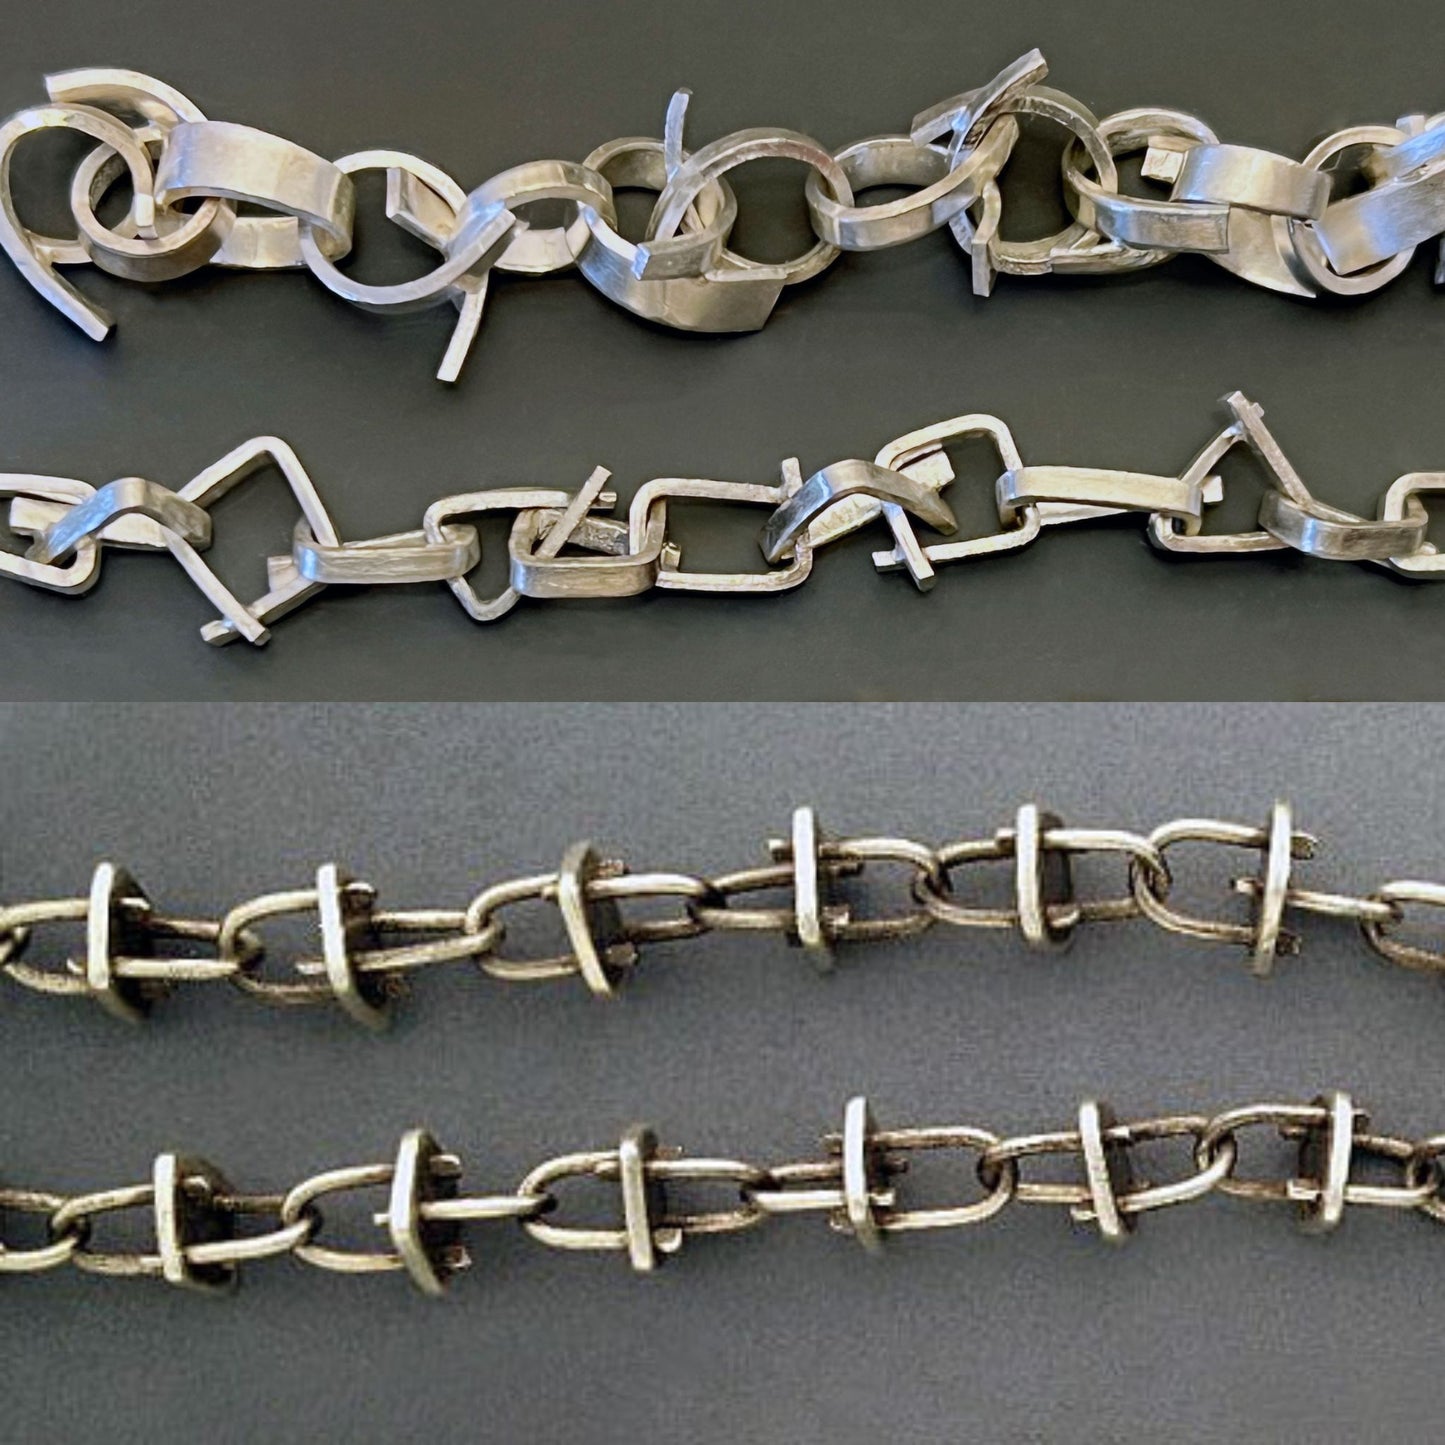 Once-of-a-kind silver modern chains by Suzanne Williams